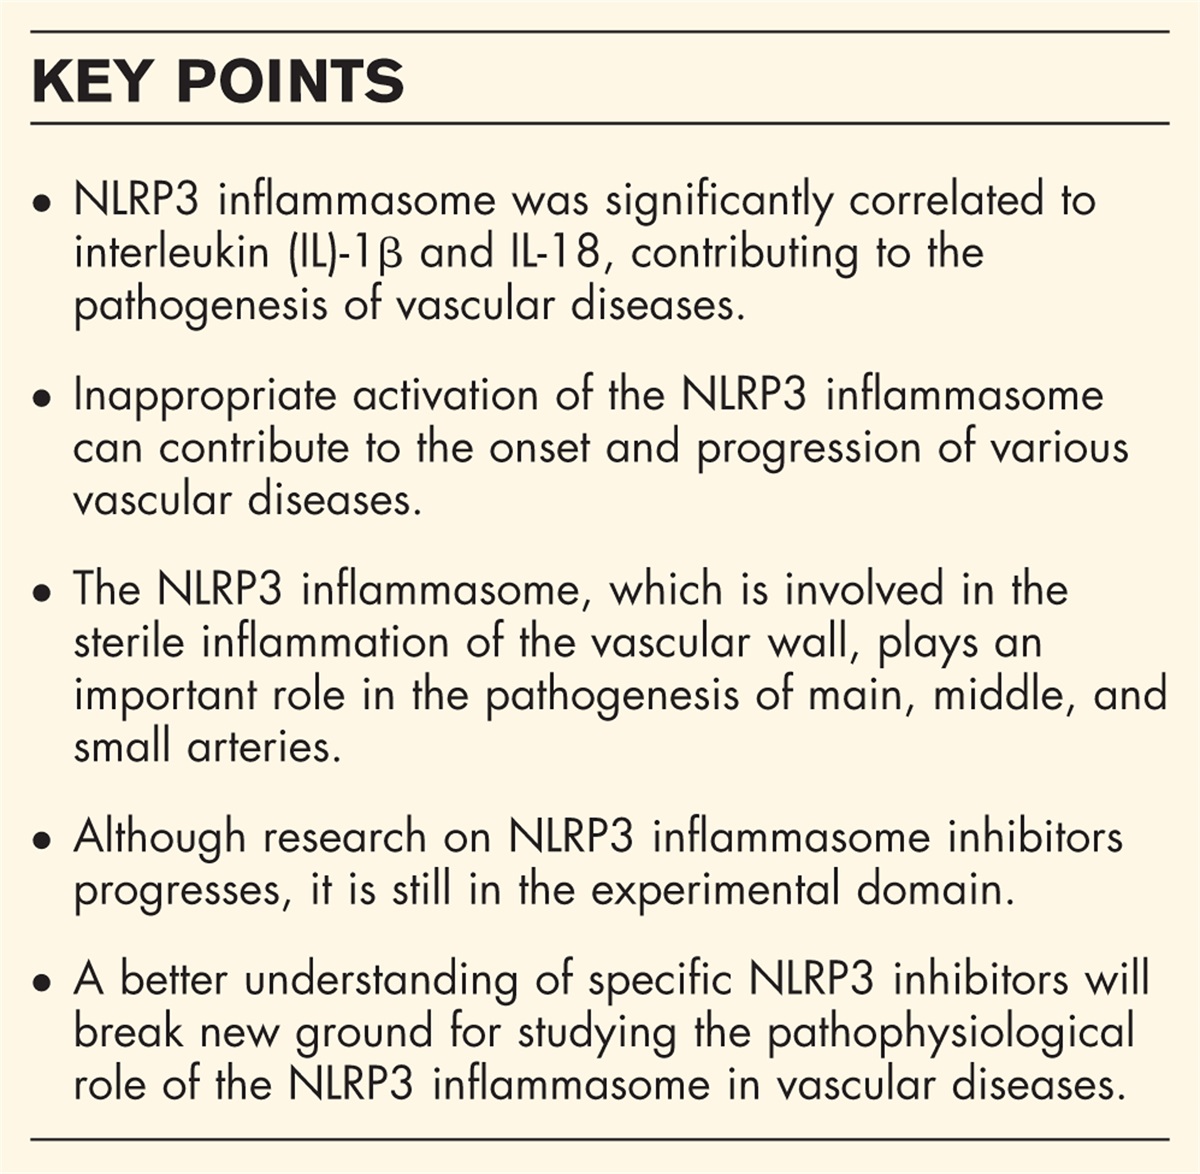 Vasculitis and the NLRP3 inflammasome